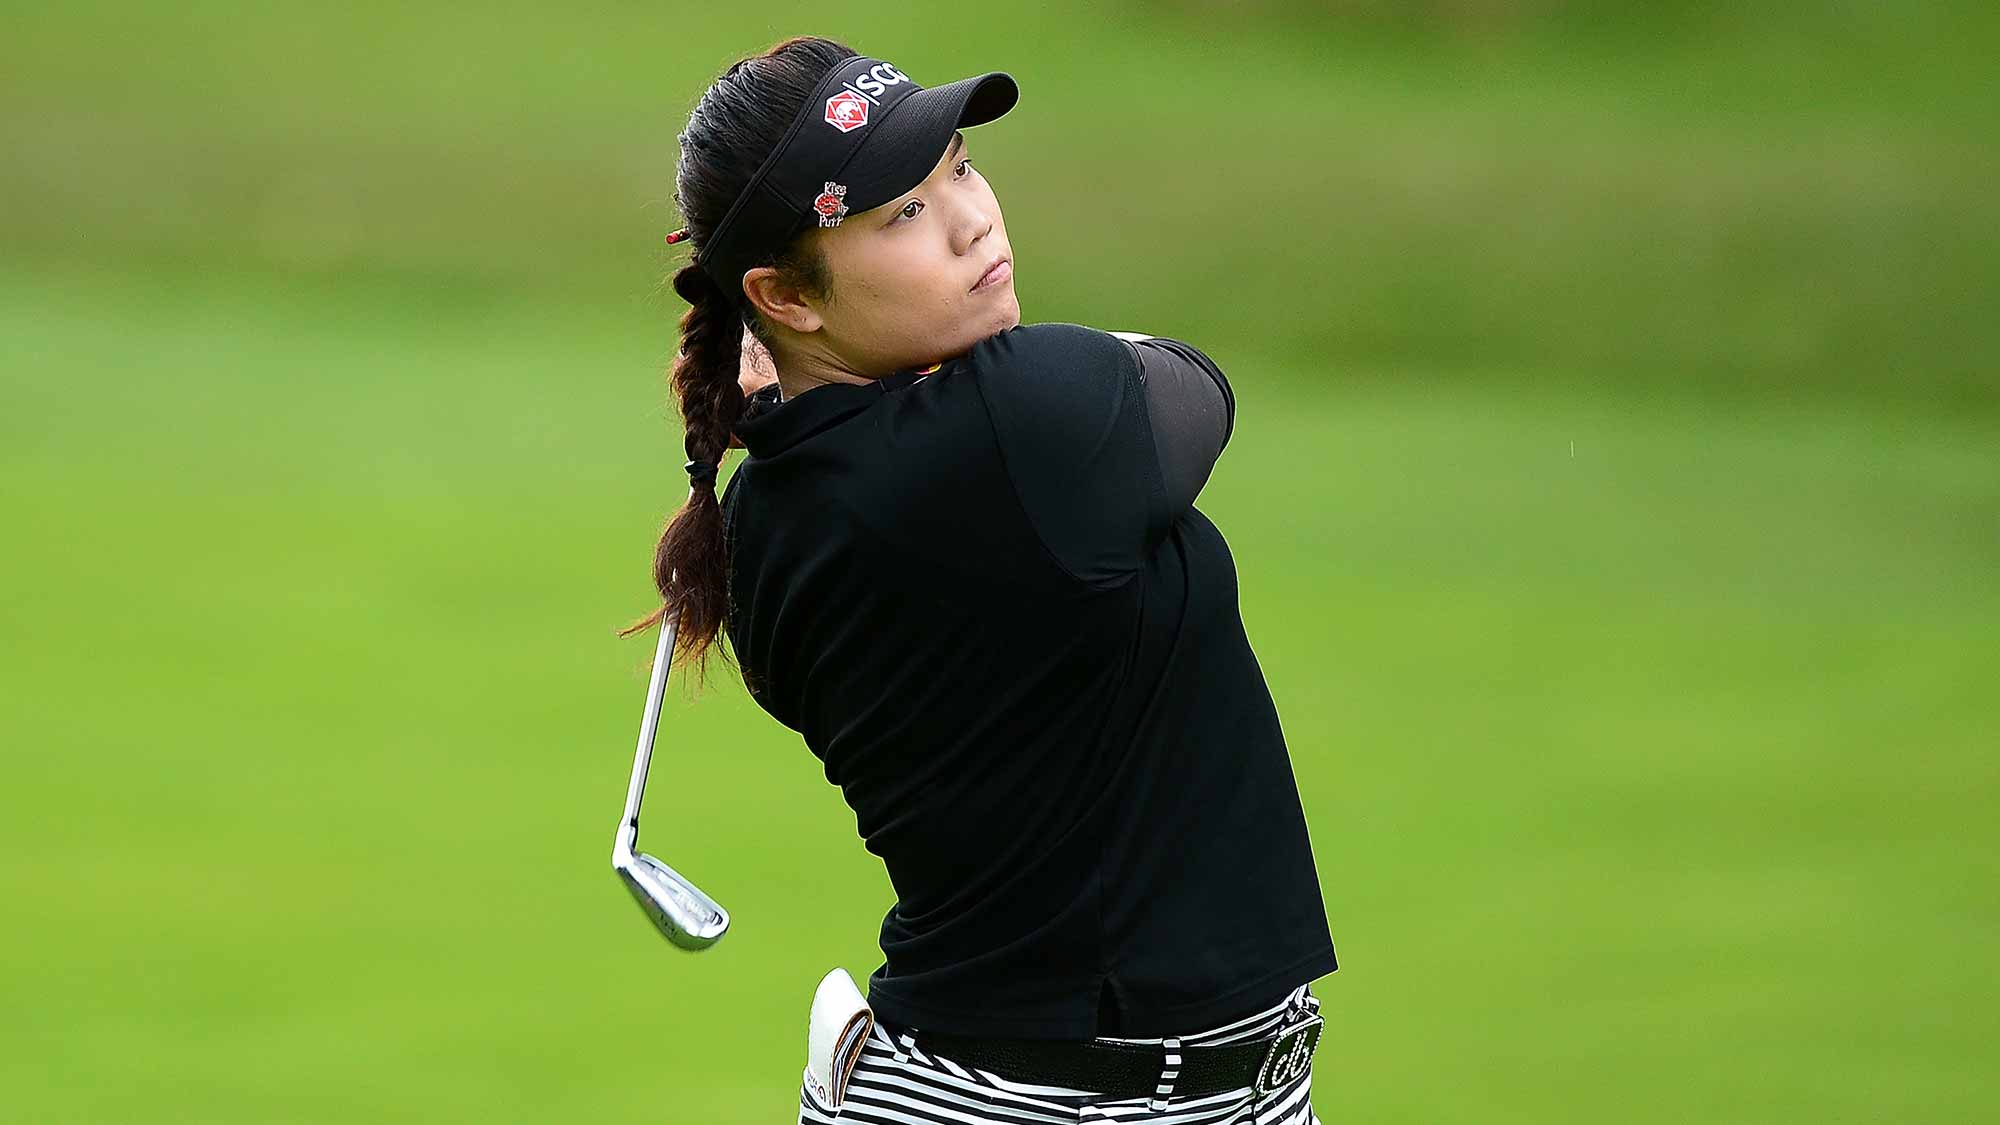 Ariya Jutanugarn of Thailand hits her second shot on the 2nd hole during the final round of the Ricoh Women's British Open at Woburn Golf Club